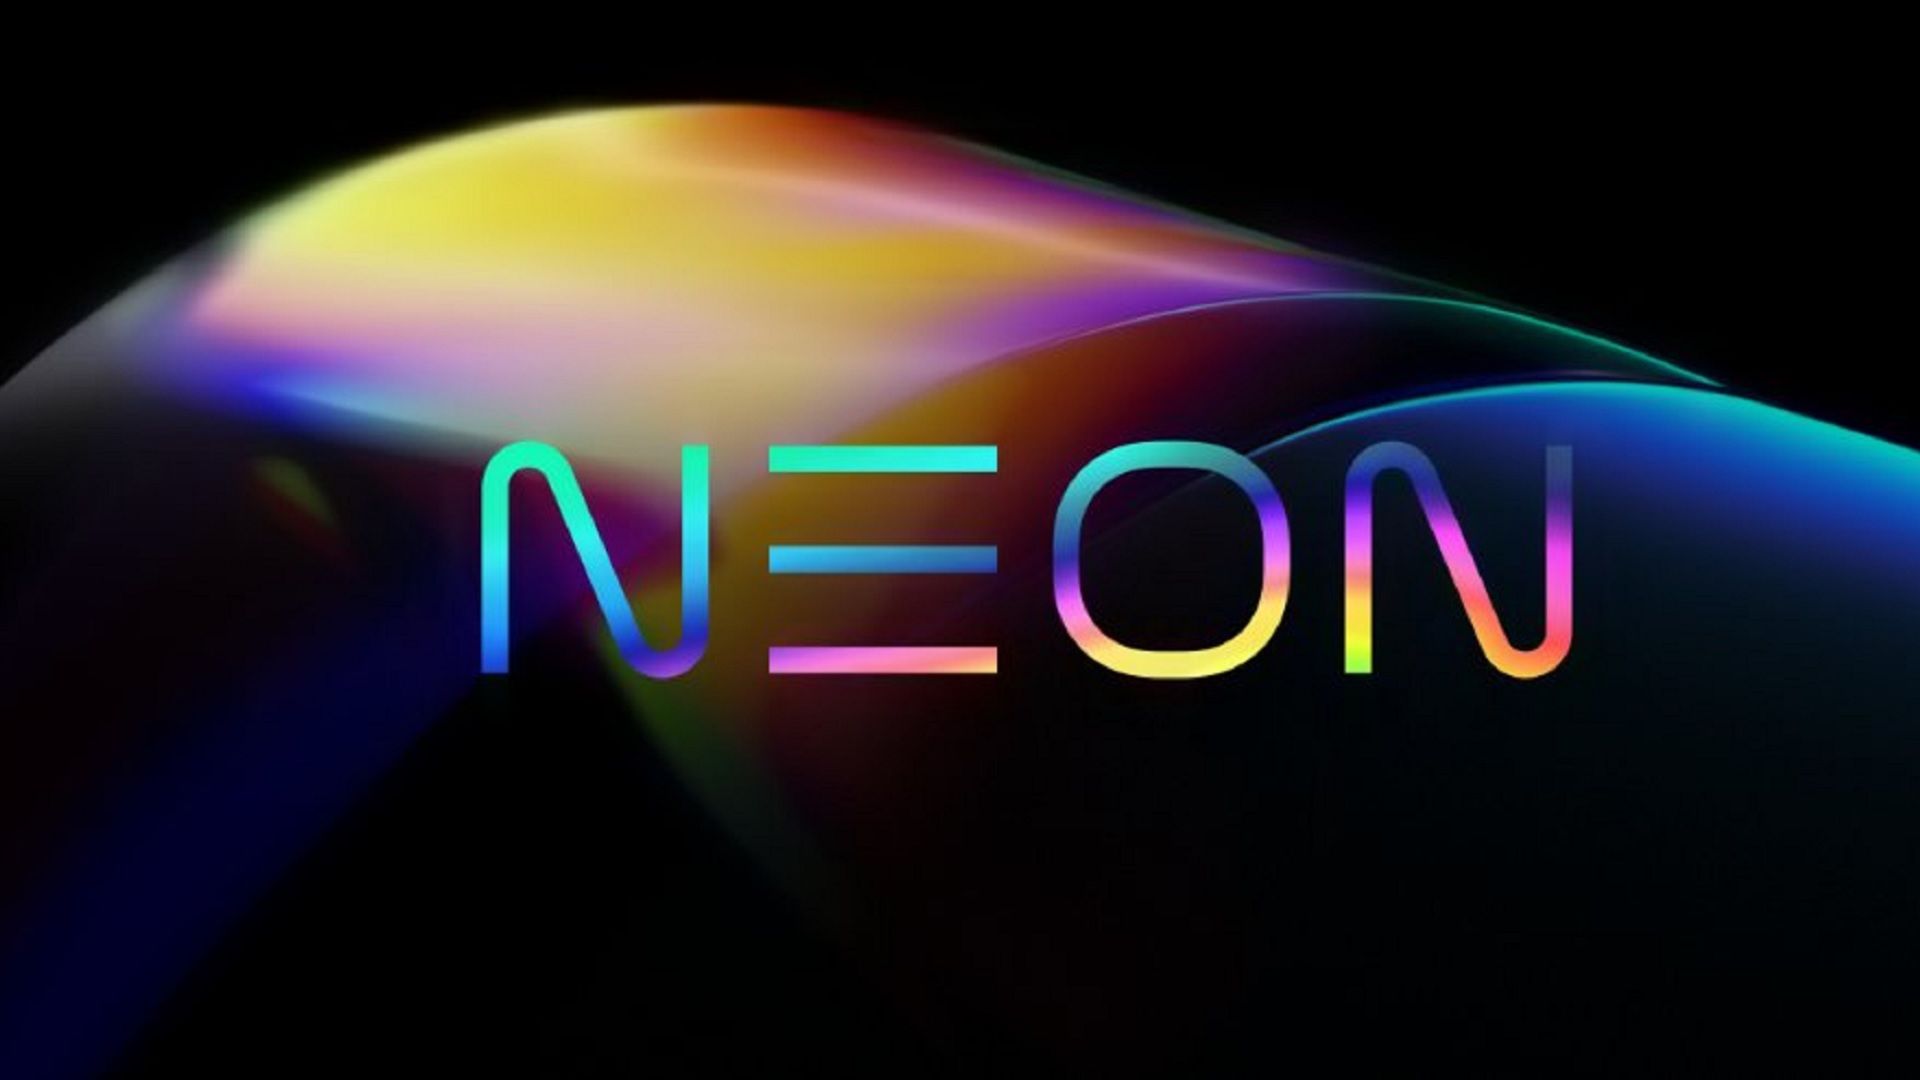 Samsung is gearing up to unveil an AI human project called Neon at CES image 1